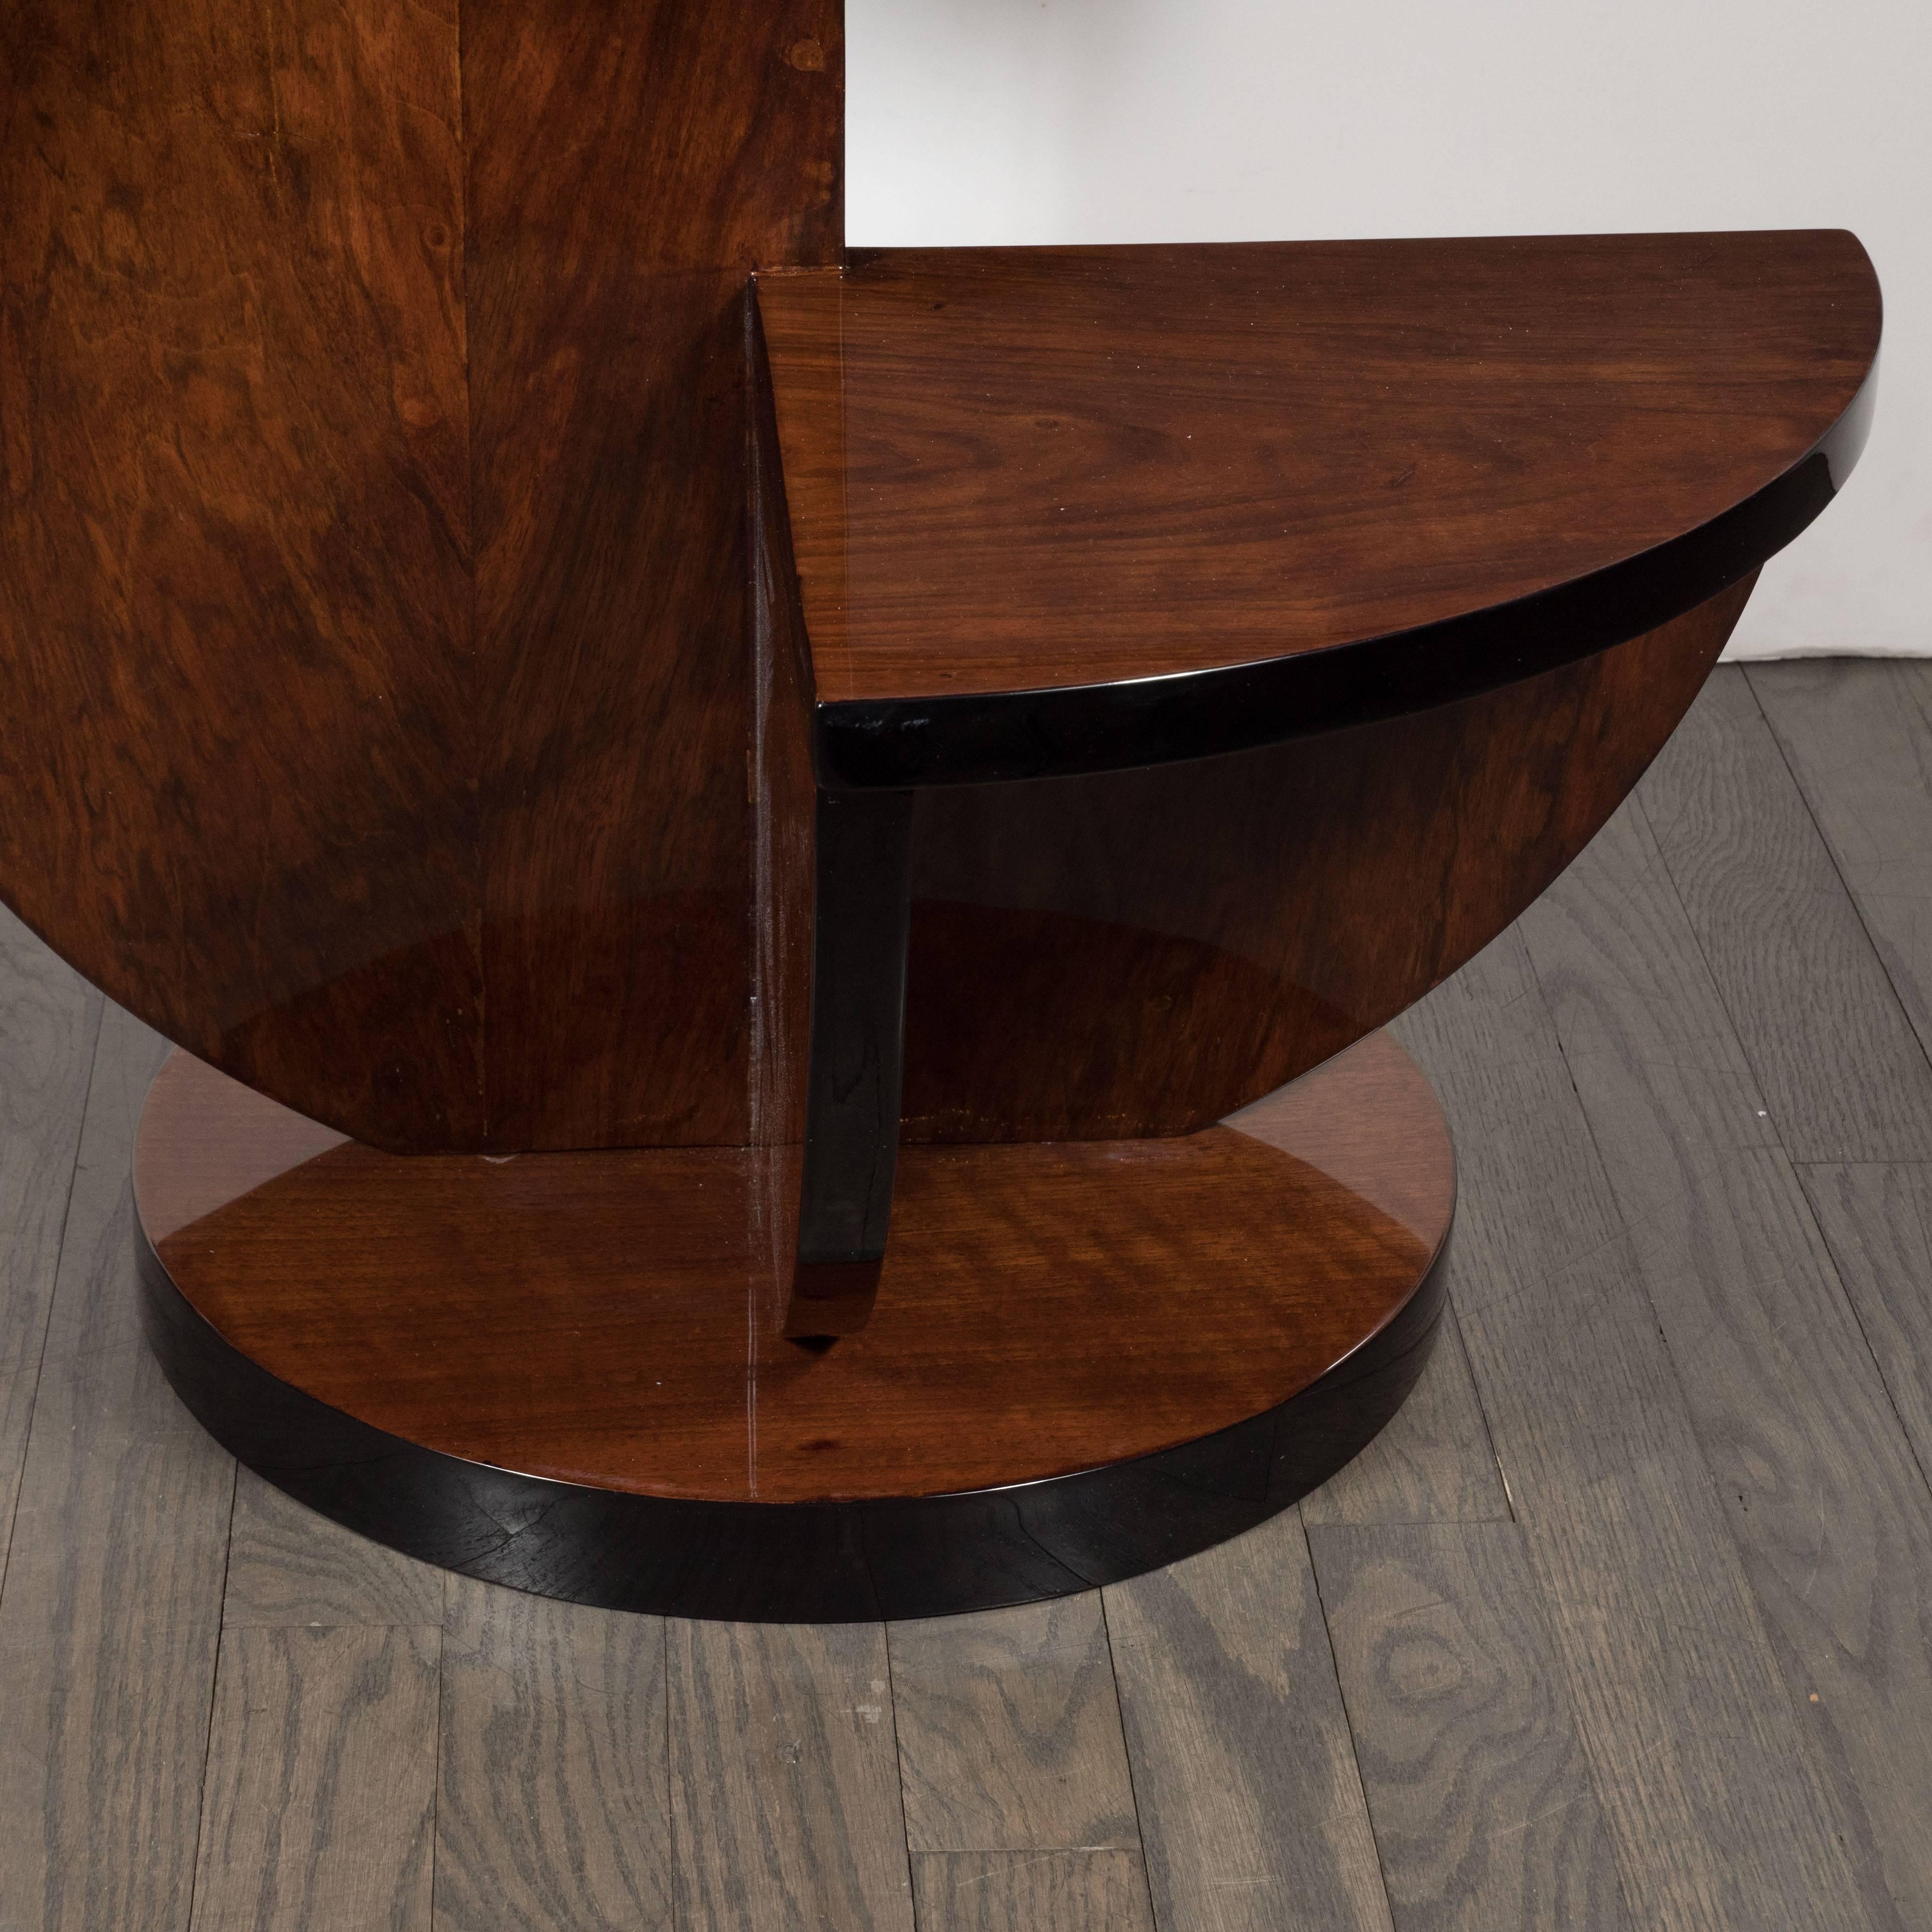 French Art Deco Cubist Side Table in Bookmatched Burled Walnut and Black Lacquer 6